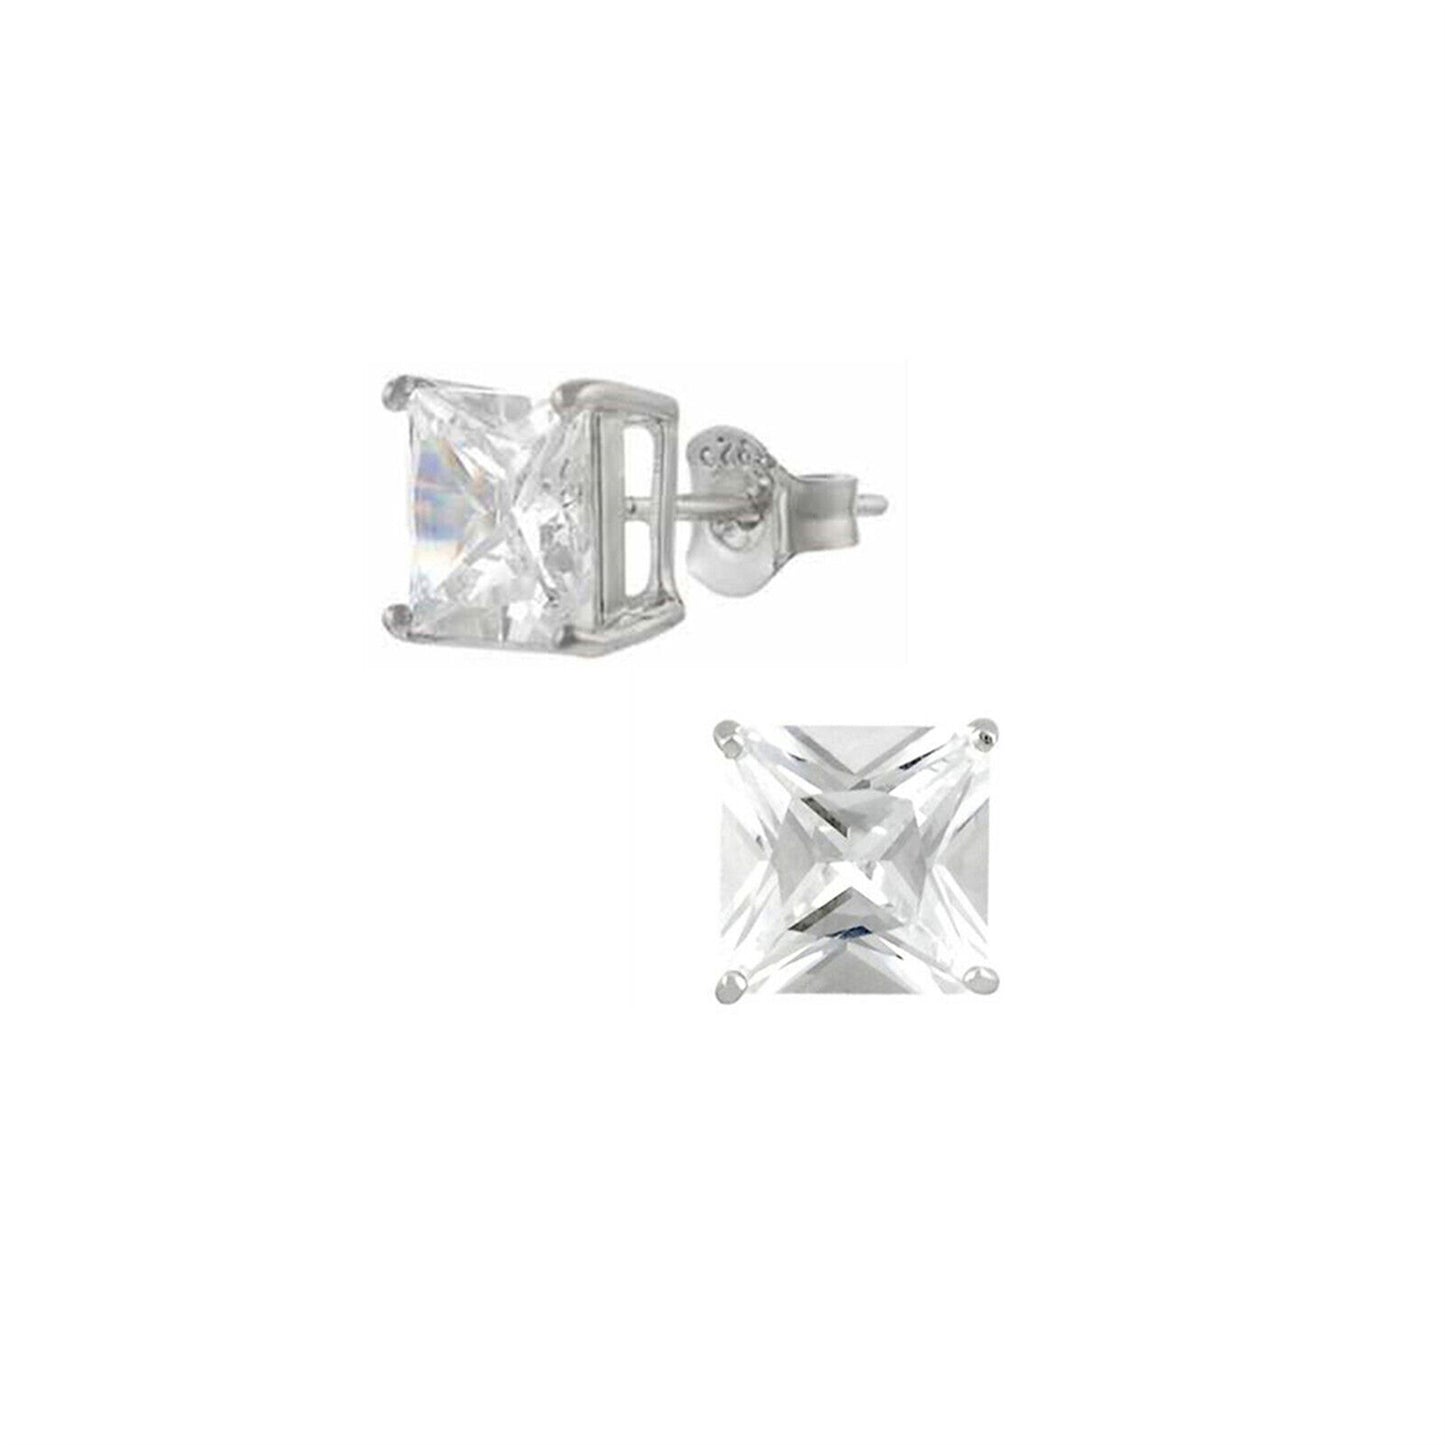 Sterling Silver Princess Cut Square CZ Stud Earrings for Women in Black and White, 2.5-10mm